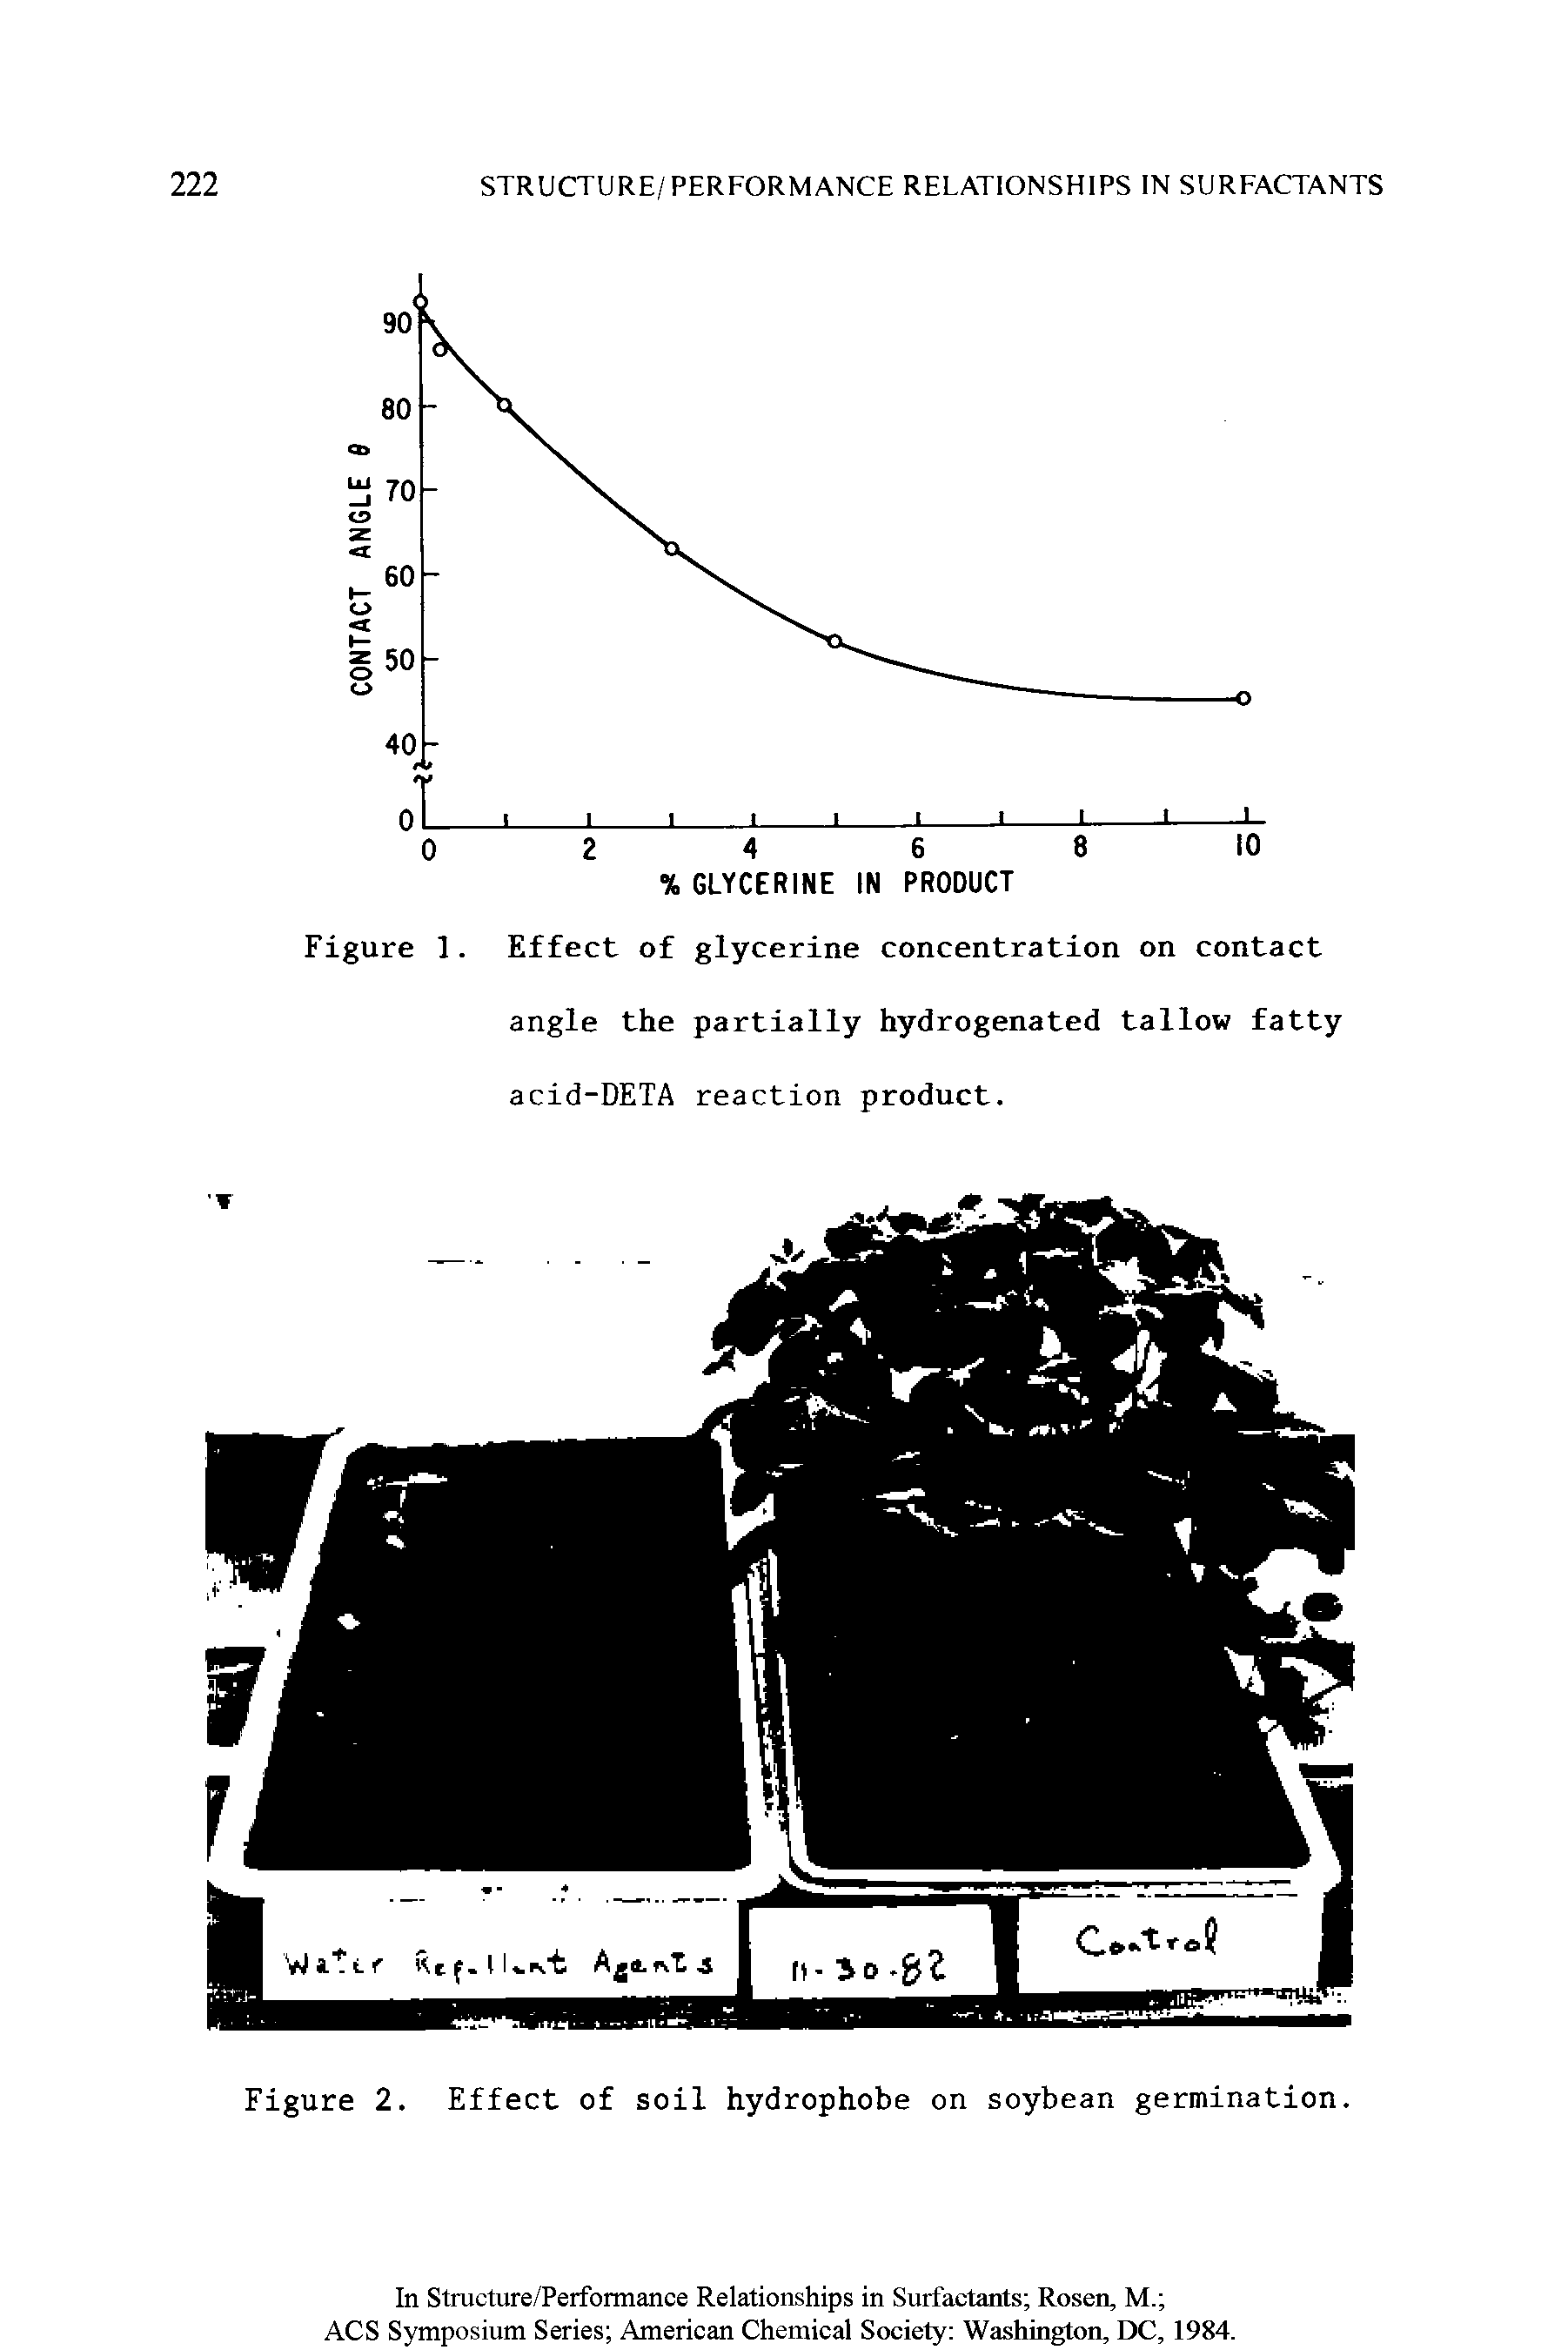 Figure 1. Effect of glycerine concentration on contact angle the partially hydrogenated tallow fatty acid-DETA reaction product.